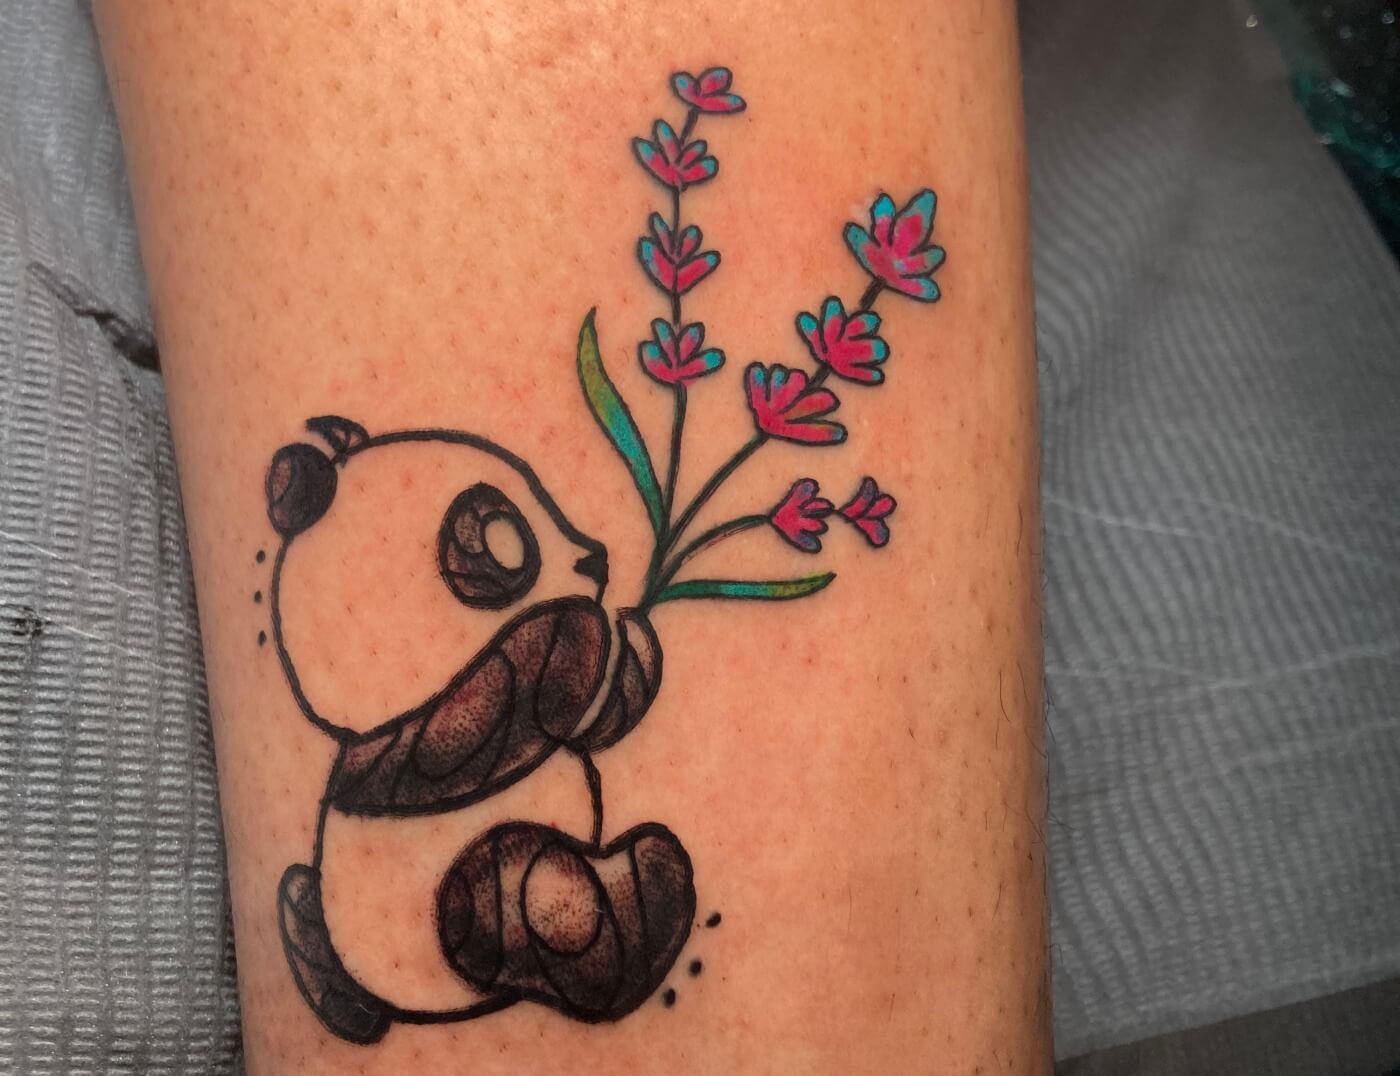 Panda Running With Flowers By Funk Tha World At Iron Palm Tattoos In Atlanta, Georgia. Call 404-973-7828 or stop by for a free consultation with Funk. Walk ins are welcome.